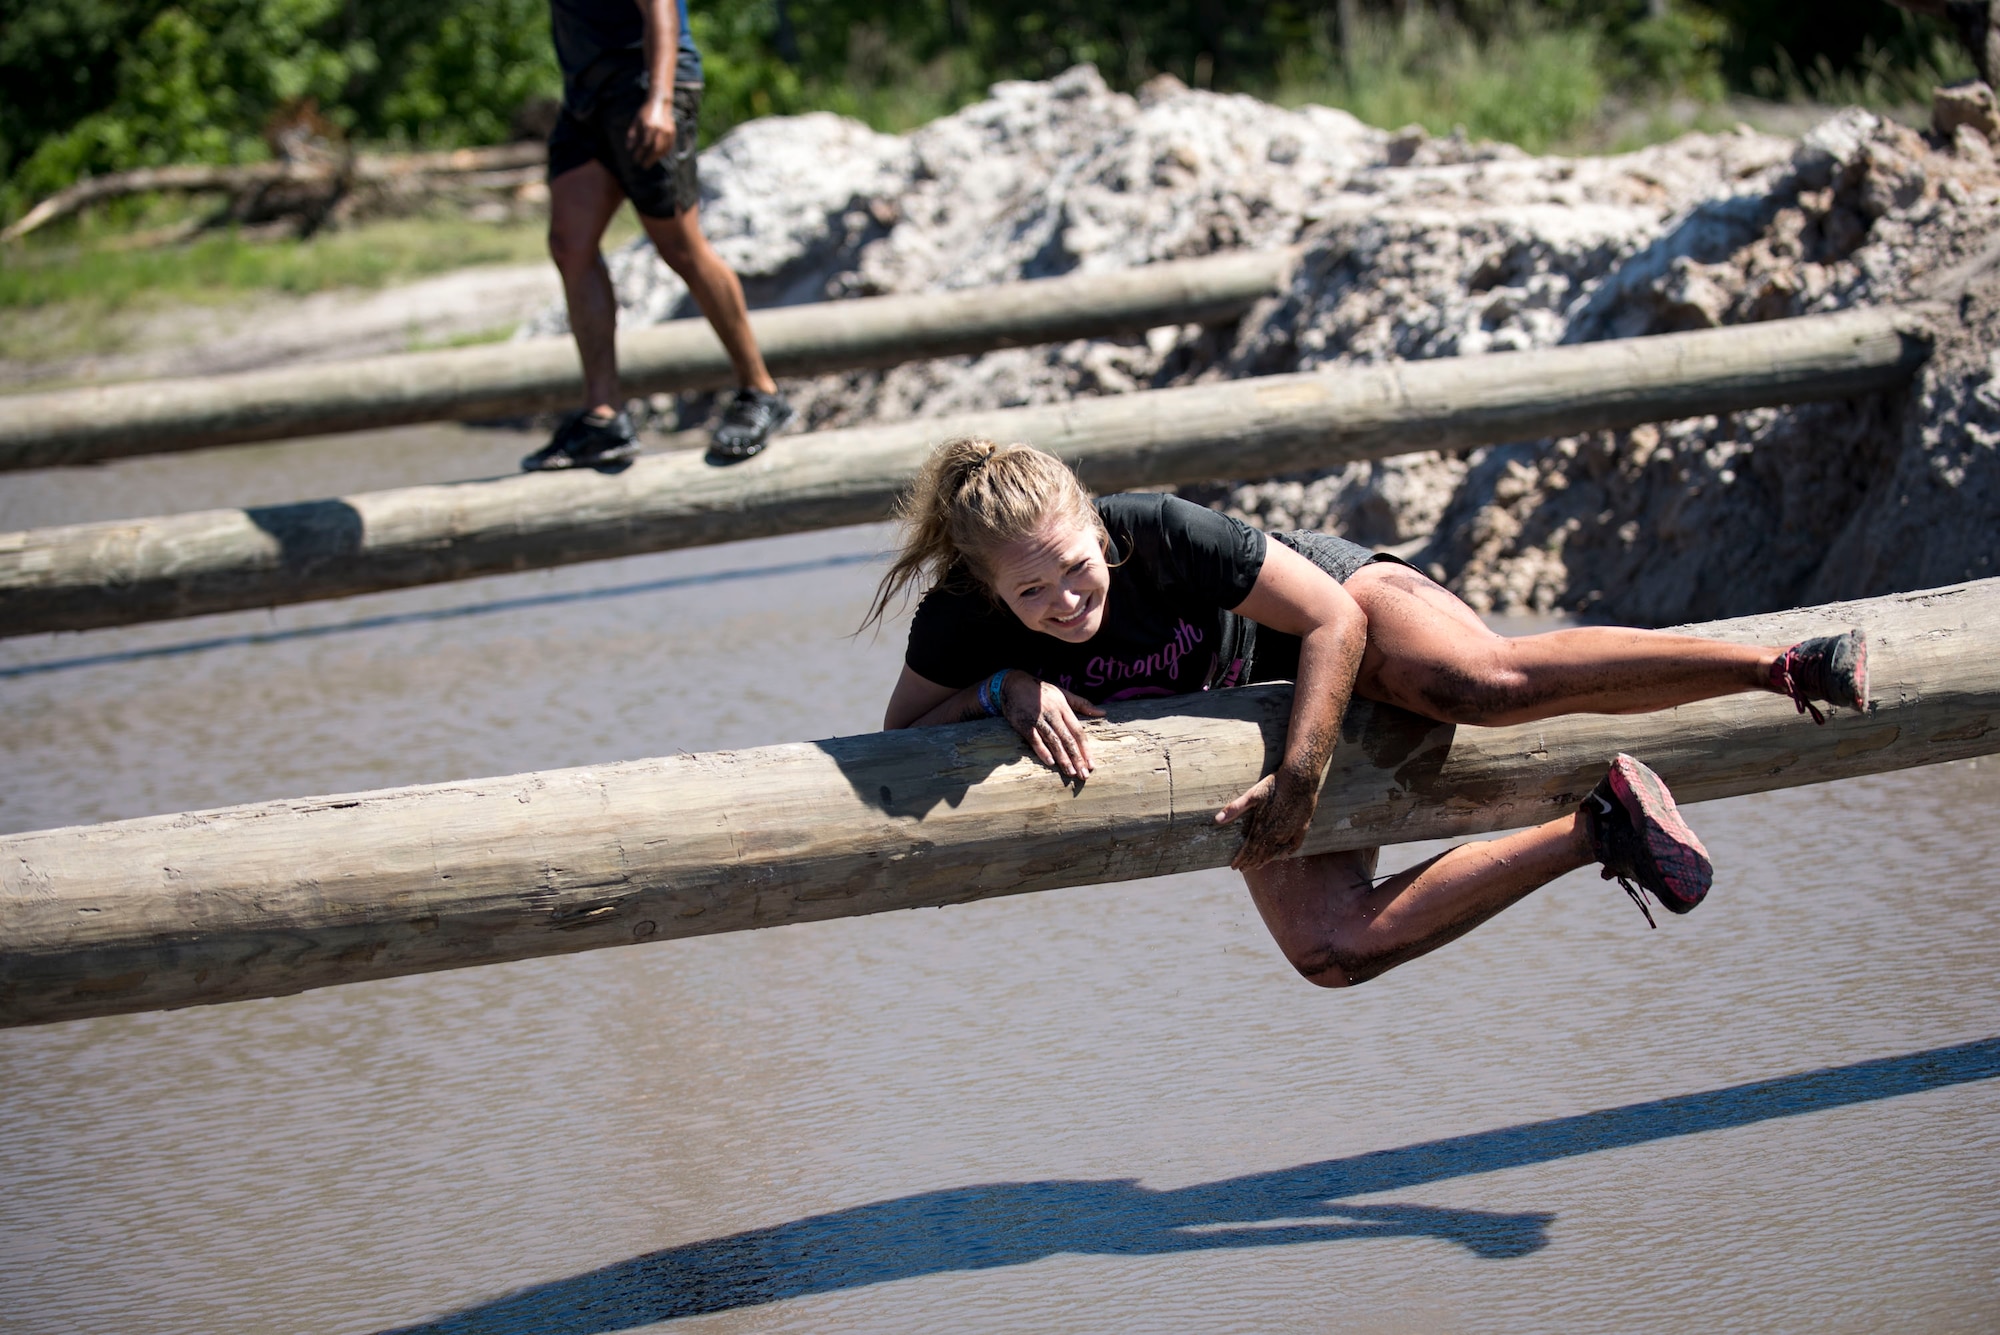 A participant clings to a log during the Moody annual Mud Run, May 6, 2017, in Ray City, Ga. The Fourth Annual Moody Mud consisted of both adult and child course that challenged more than 600 participants with obstacles over 4.2 miles. (U.S. Air Force photo by Airman 1st Class Daniel Snider)